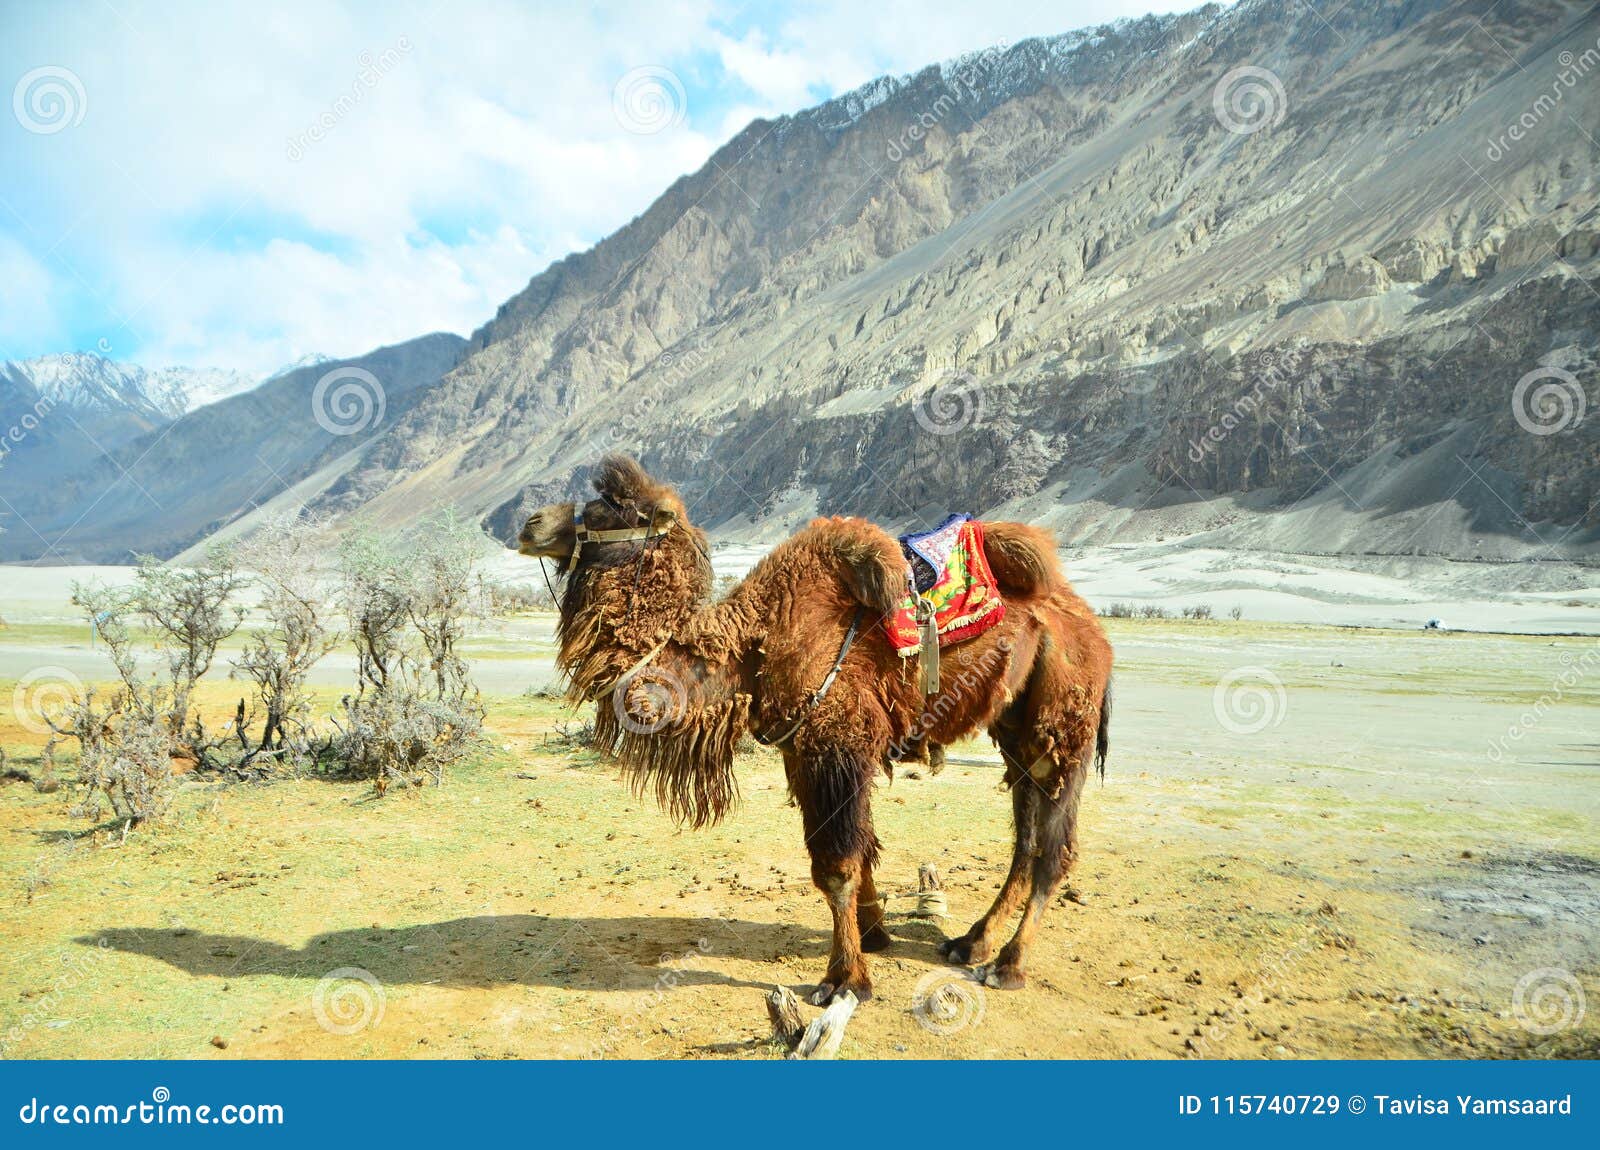 Camel for Tourists in Leh Desert the Capital of the Himalayan Kingdom of  Ladakh,India Stock Image - Image of ladakhindia, flags: 115740729